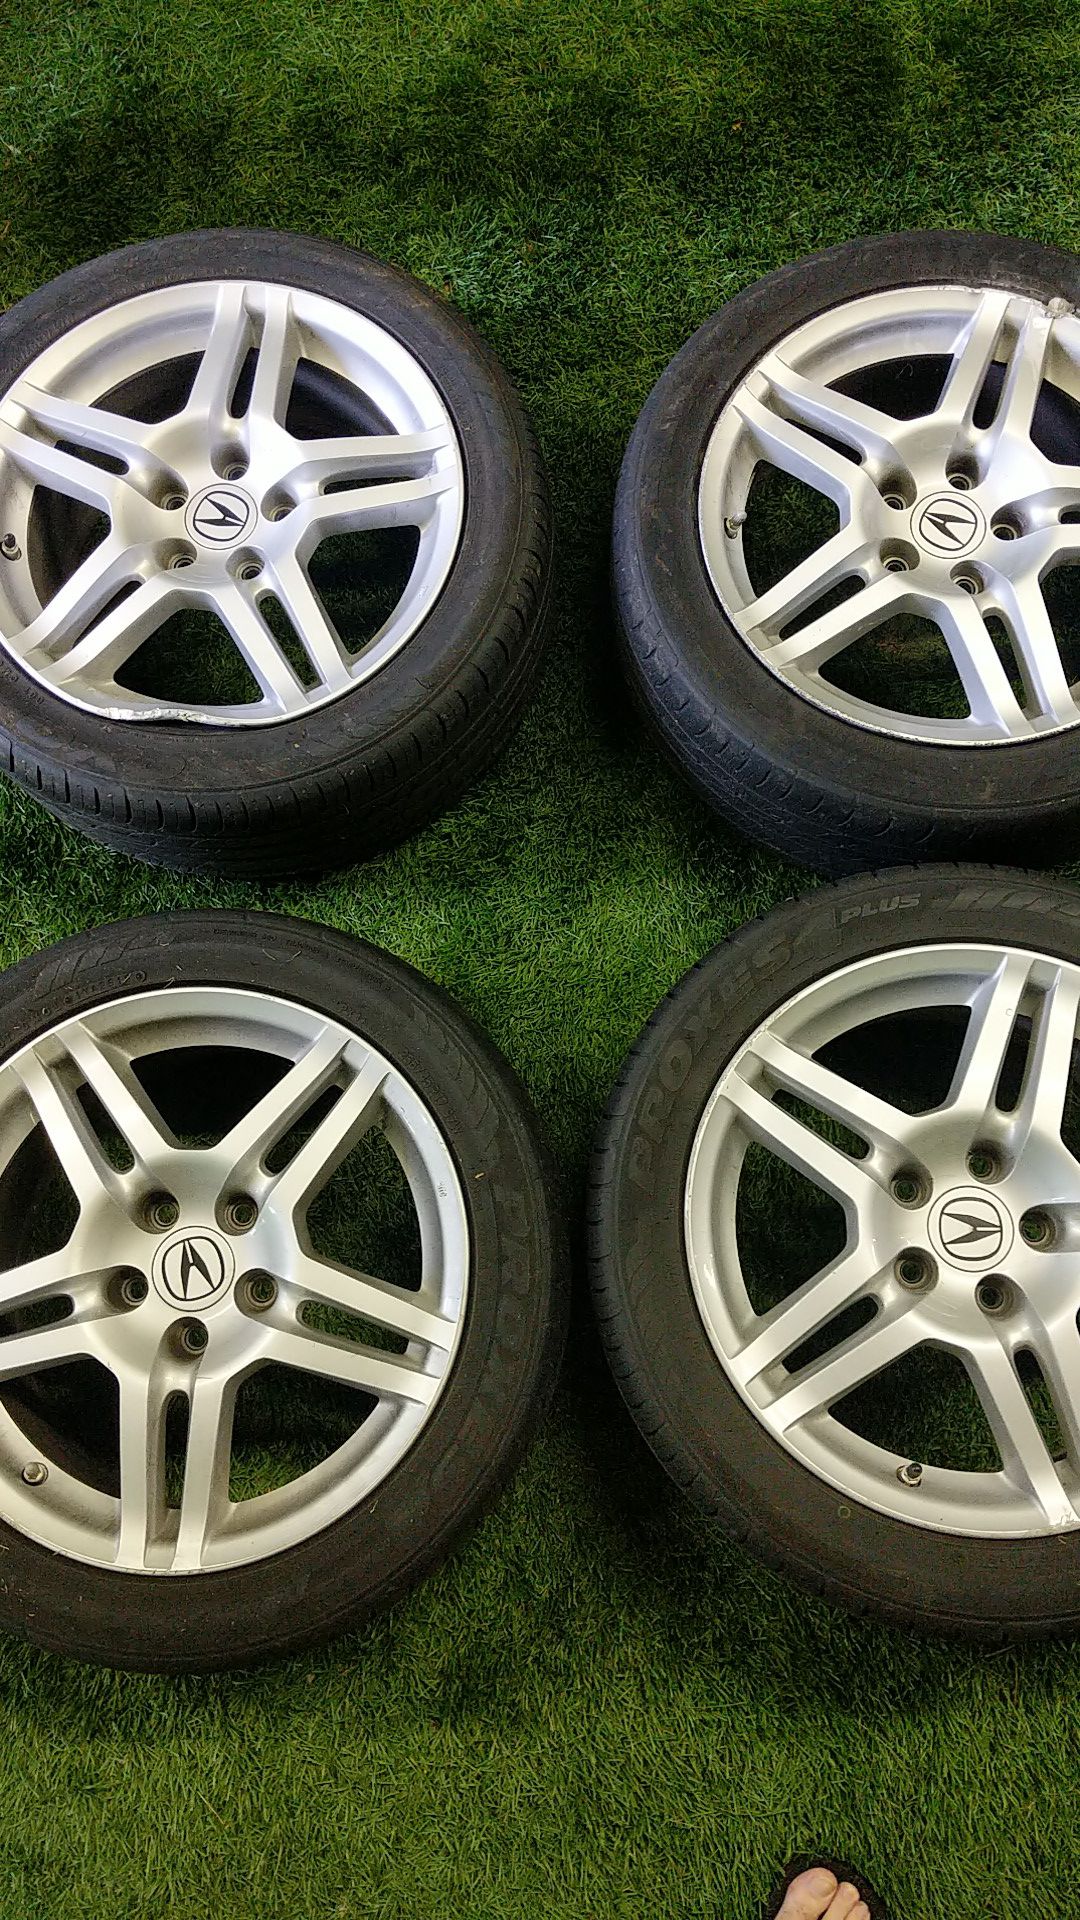 Acura rims and tires (4) . 2 tires and rims damaged by curb. 2 in great condition